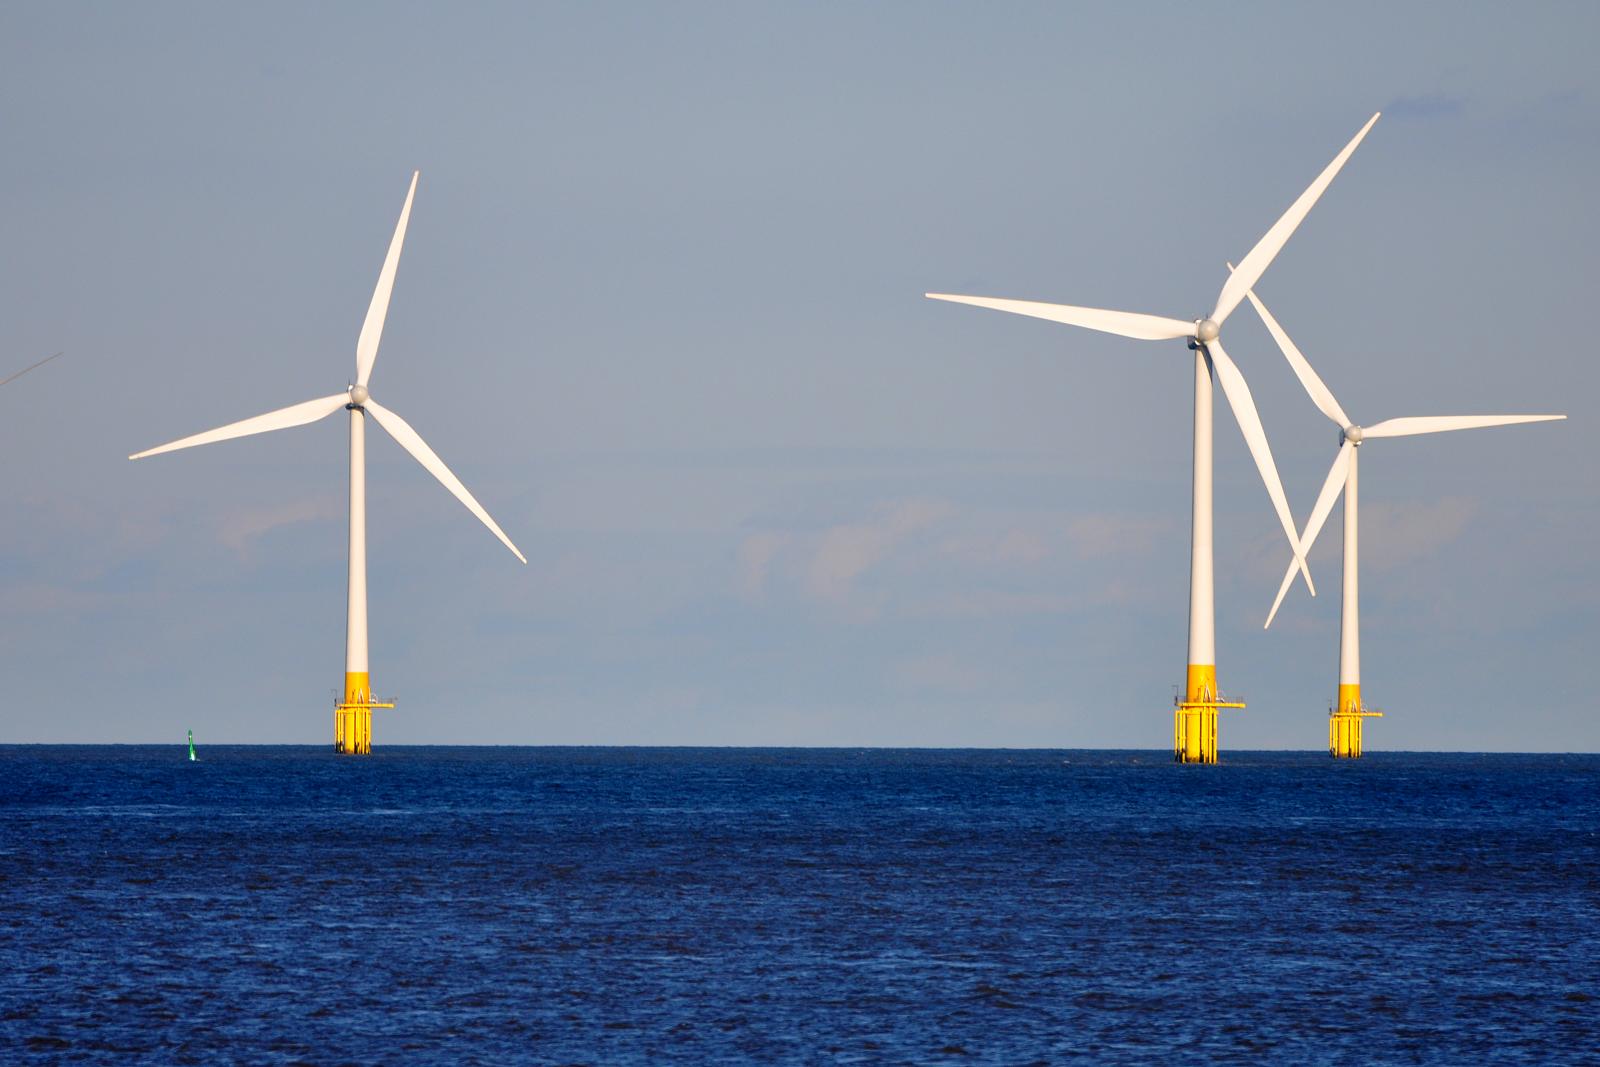 Three offshore wind turbines stand tall in the water.